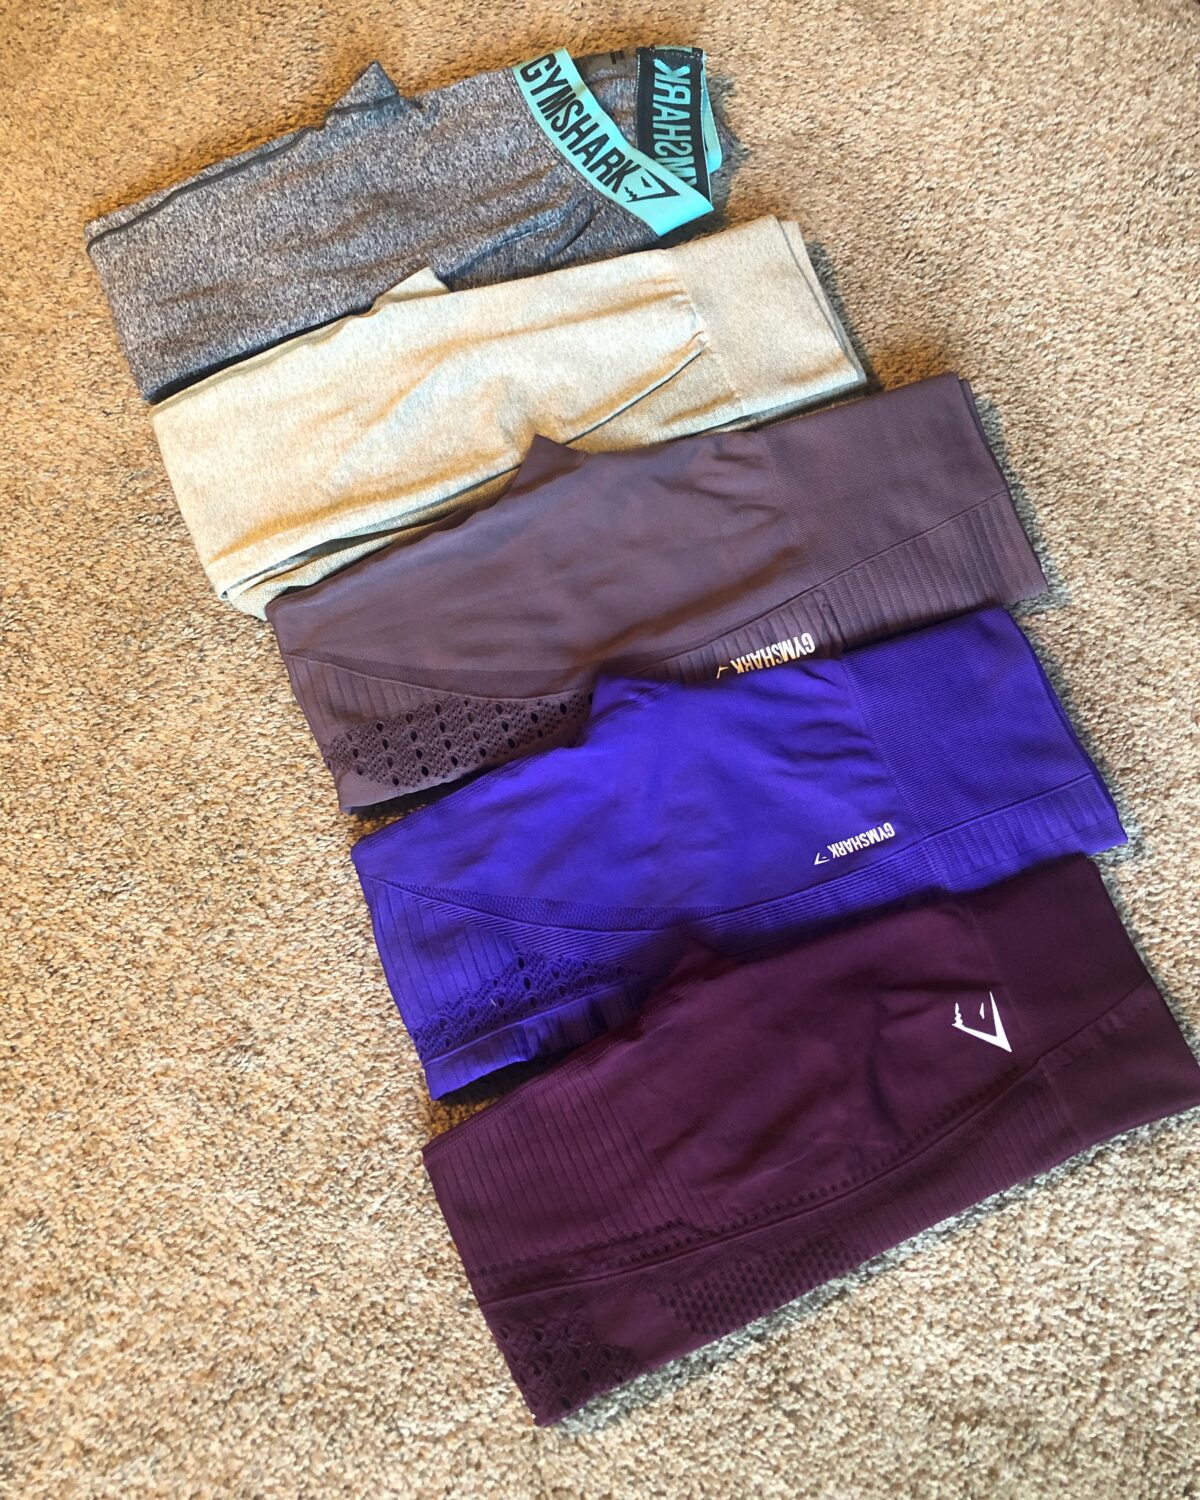 GYMSHARK TRY ON REVIEW HAUL, SIZING ? 